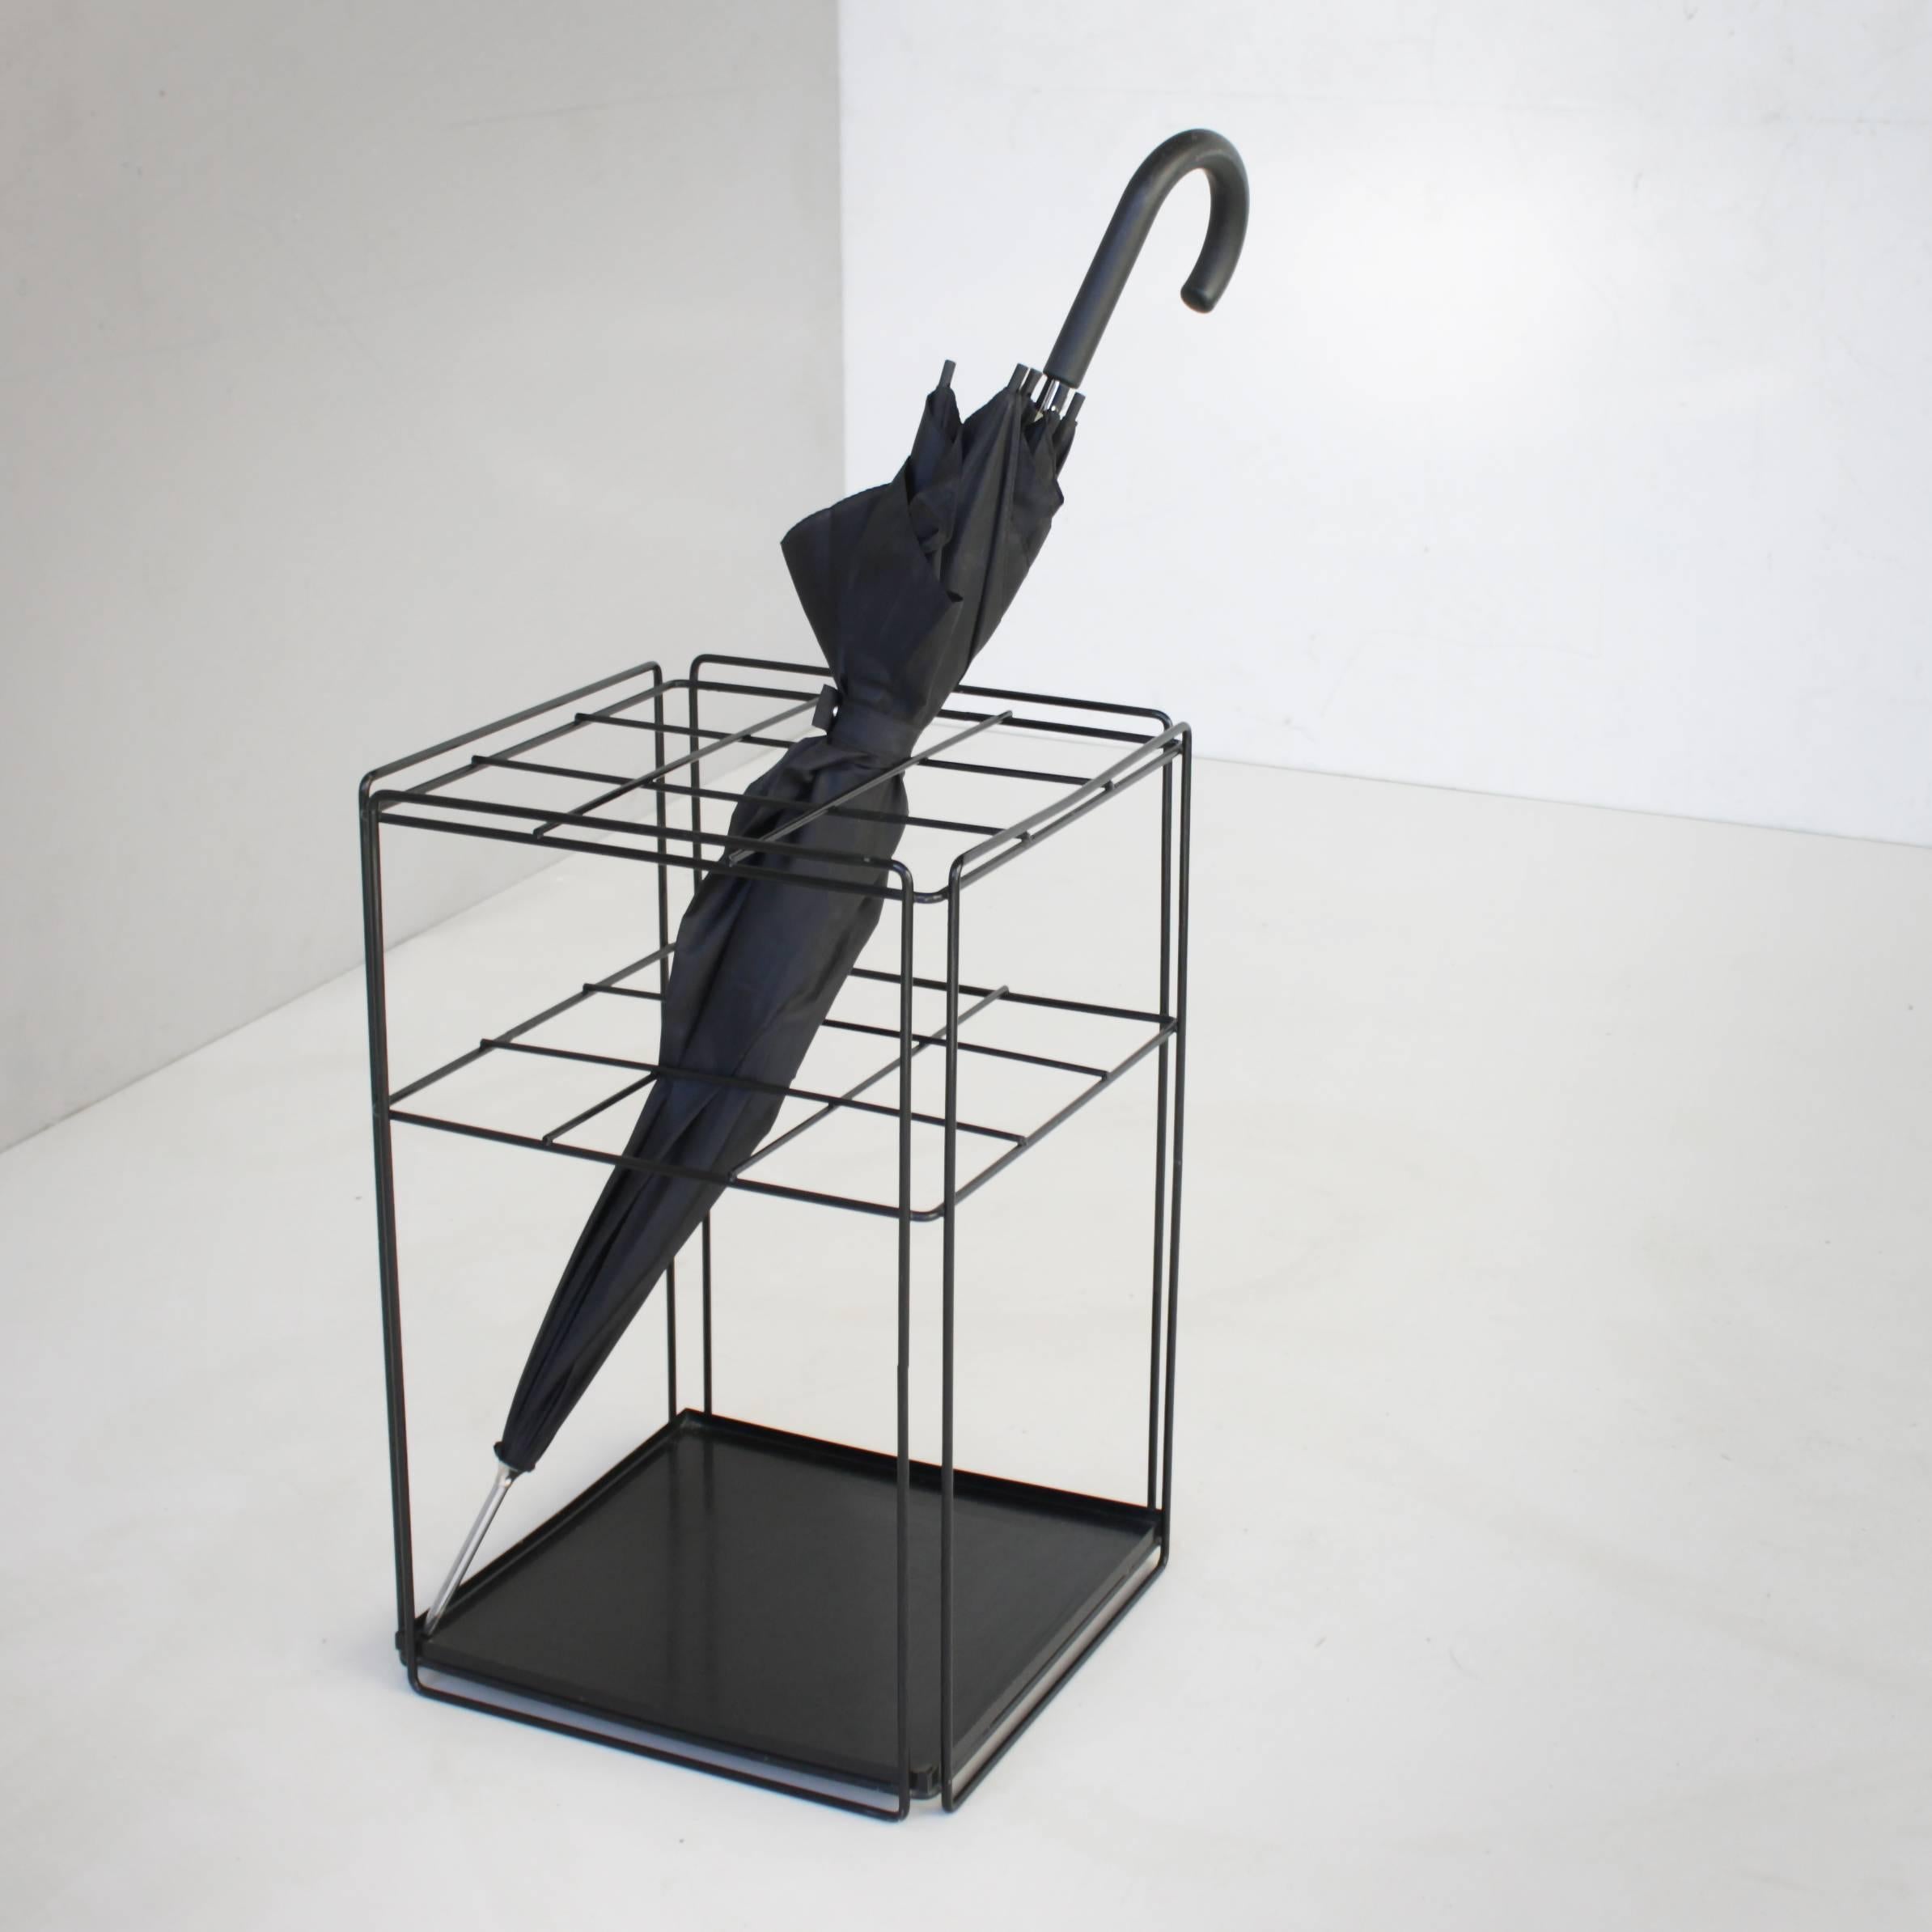 Minimalist black lacquered umbrella stand by French artist Max Sauze for Atrow, circa 1970. Geometric and sculptural. We have also a set nesting tables from the same series.